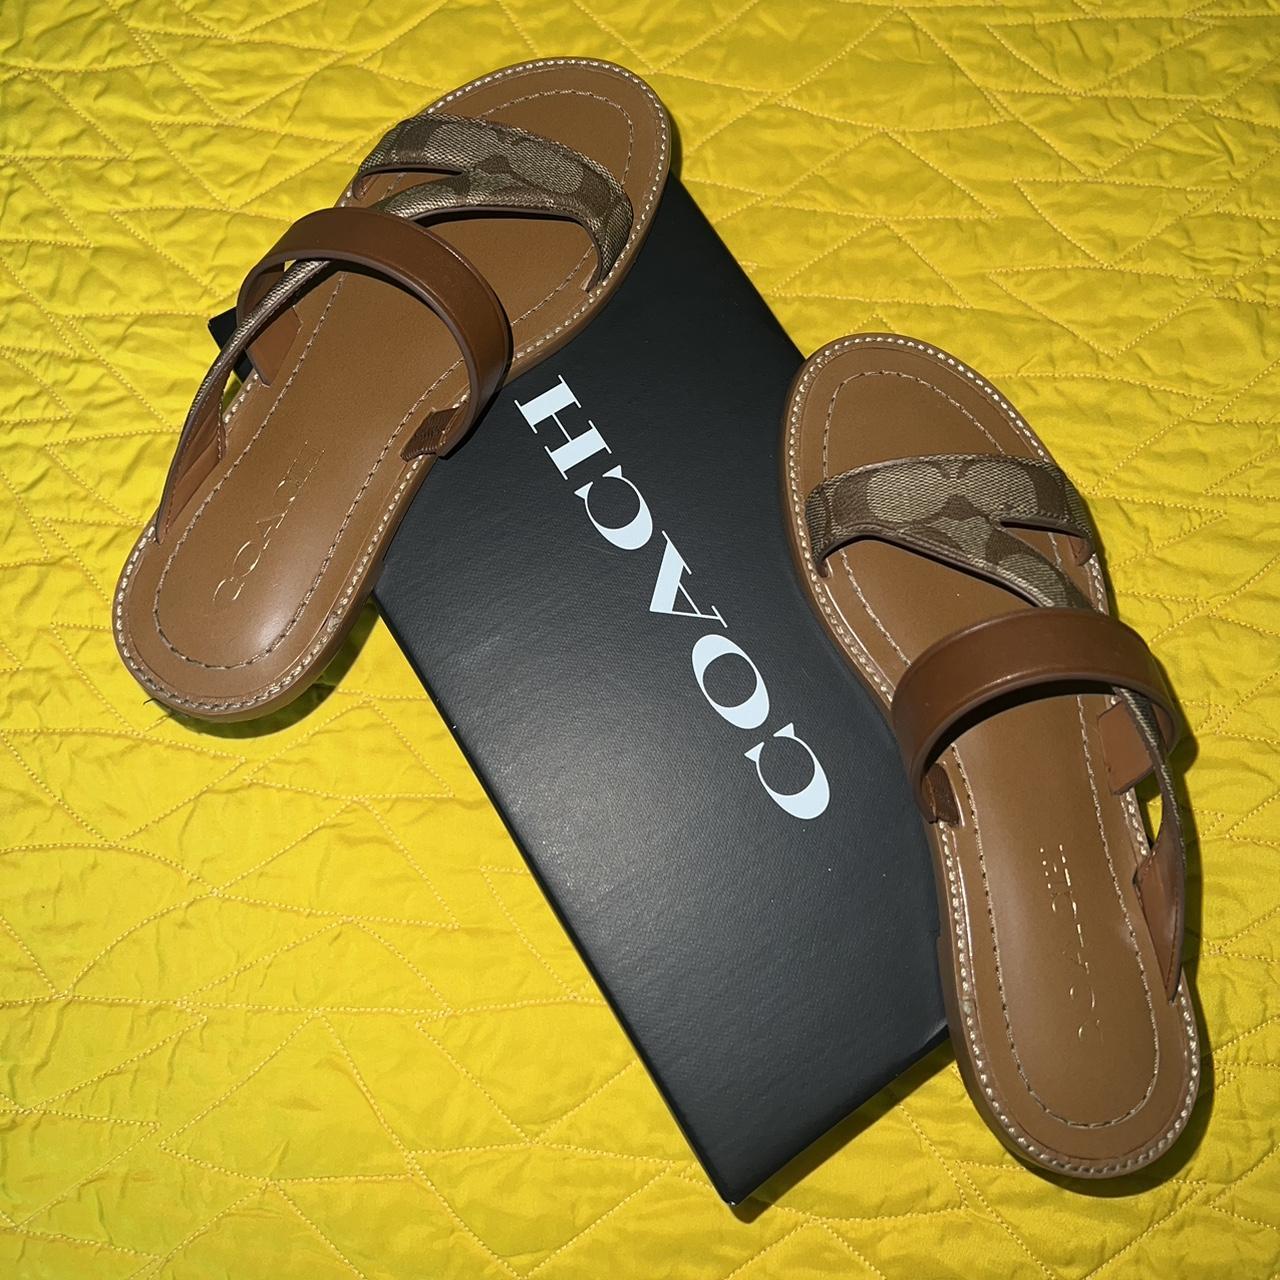 The Coach Harlan Sandal Signature coated canvas and... - Depop